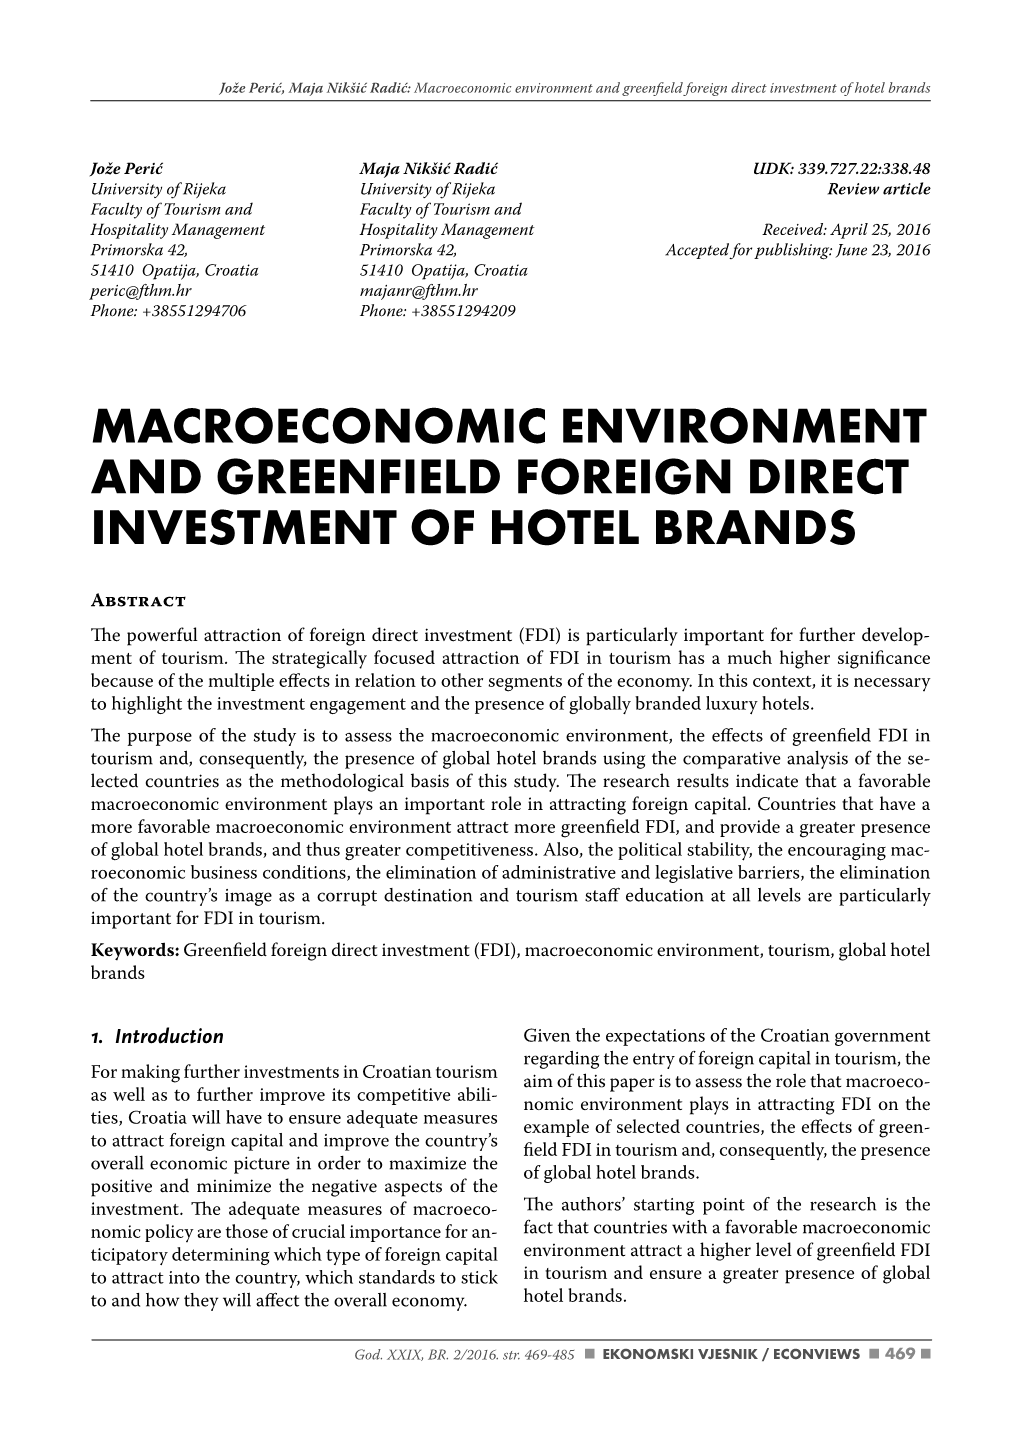 Macroeconomic Environment and Greenfield Foreign Direct Investment of Hotel Brands